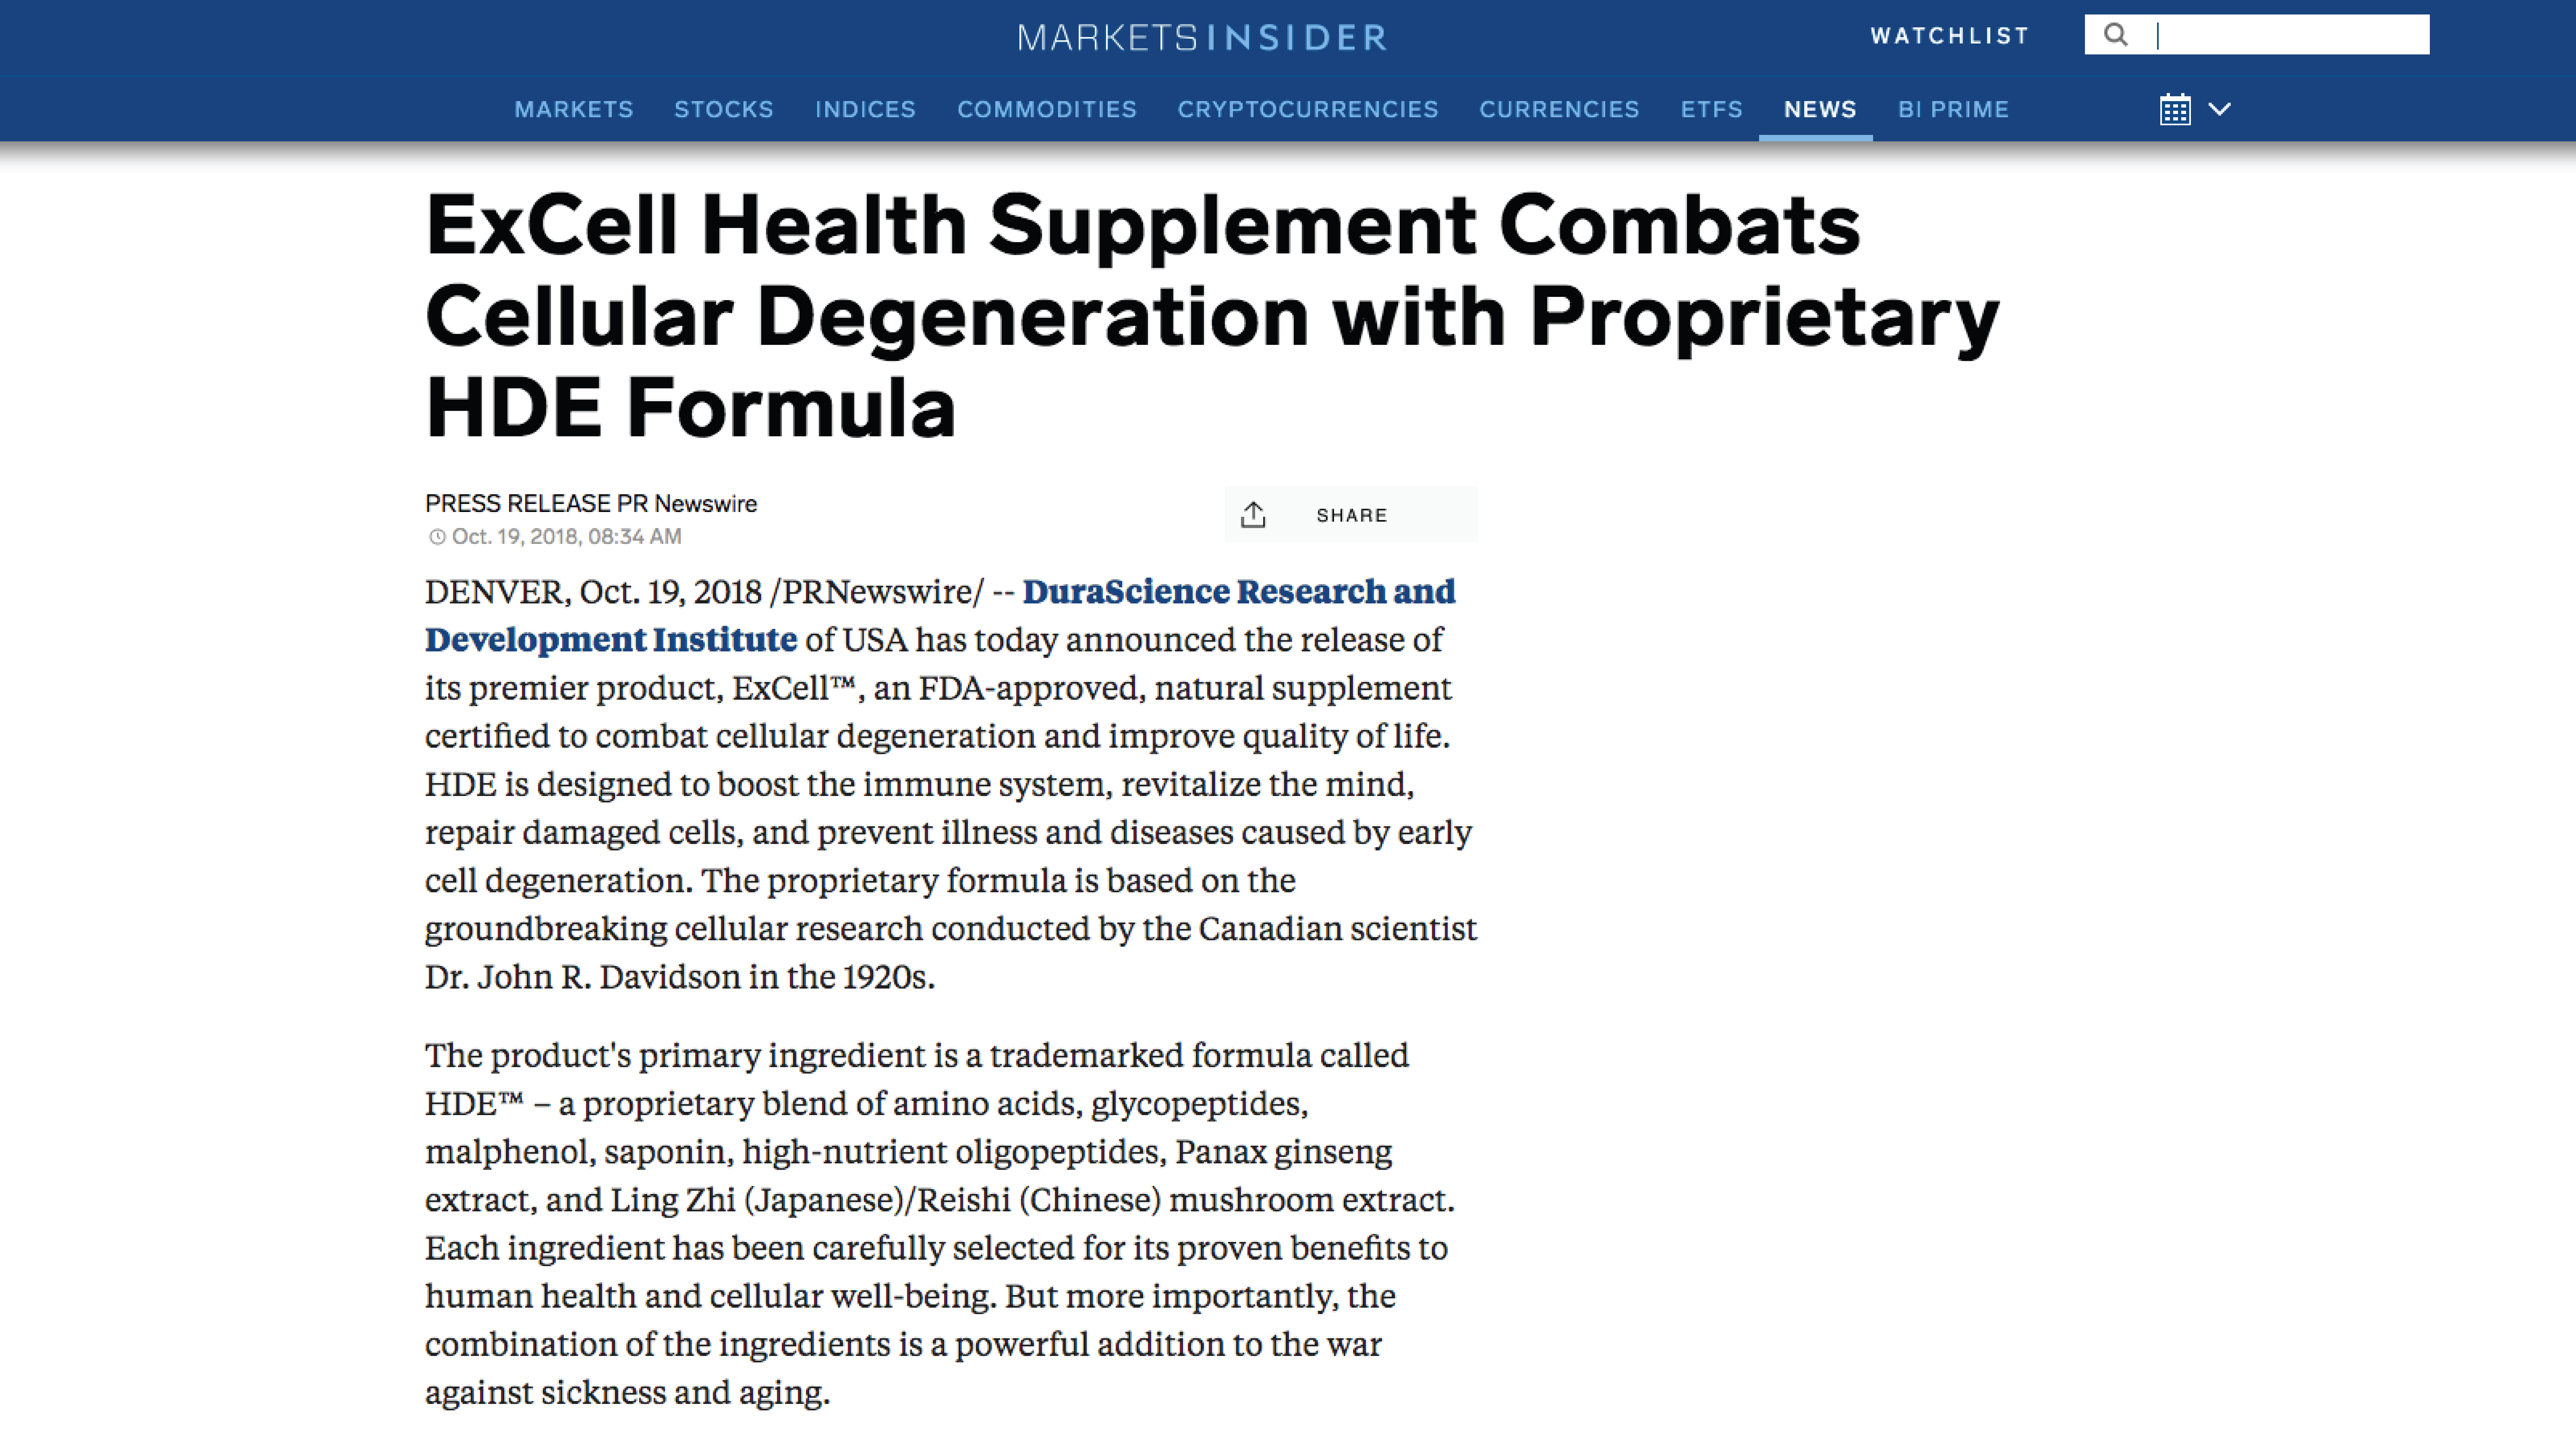 ExCell Health Supplement Combats Cellular Degeneration With Proprietary HDE Formula